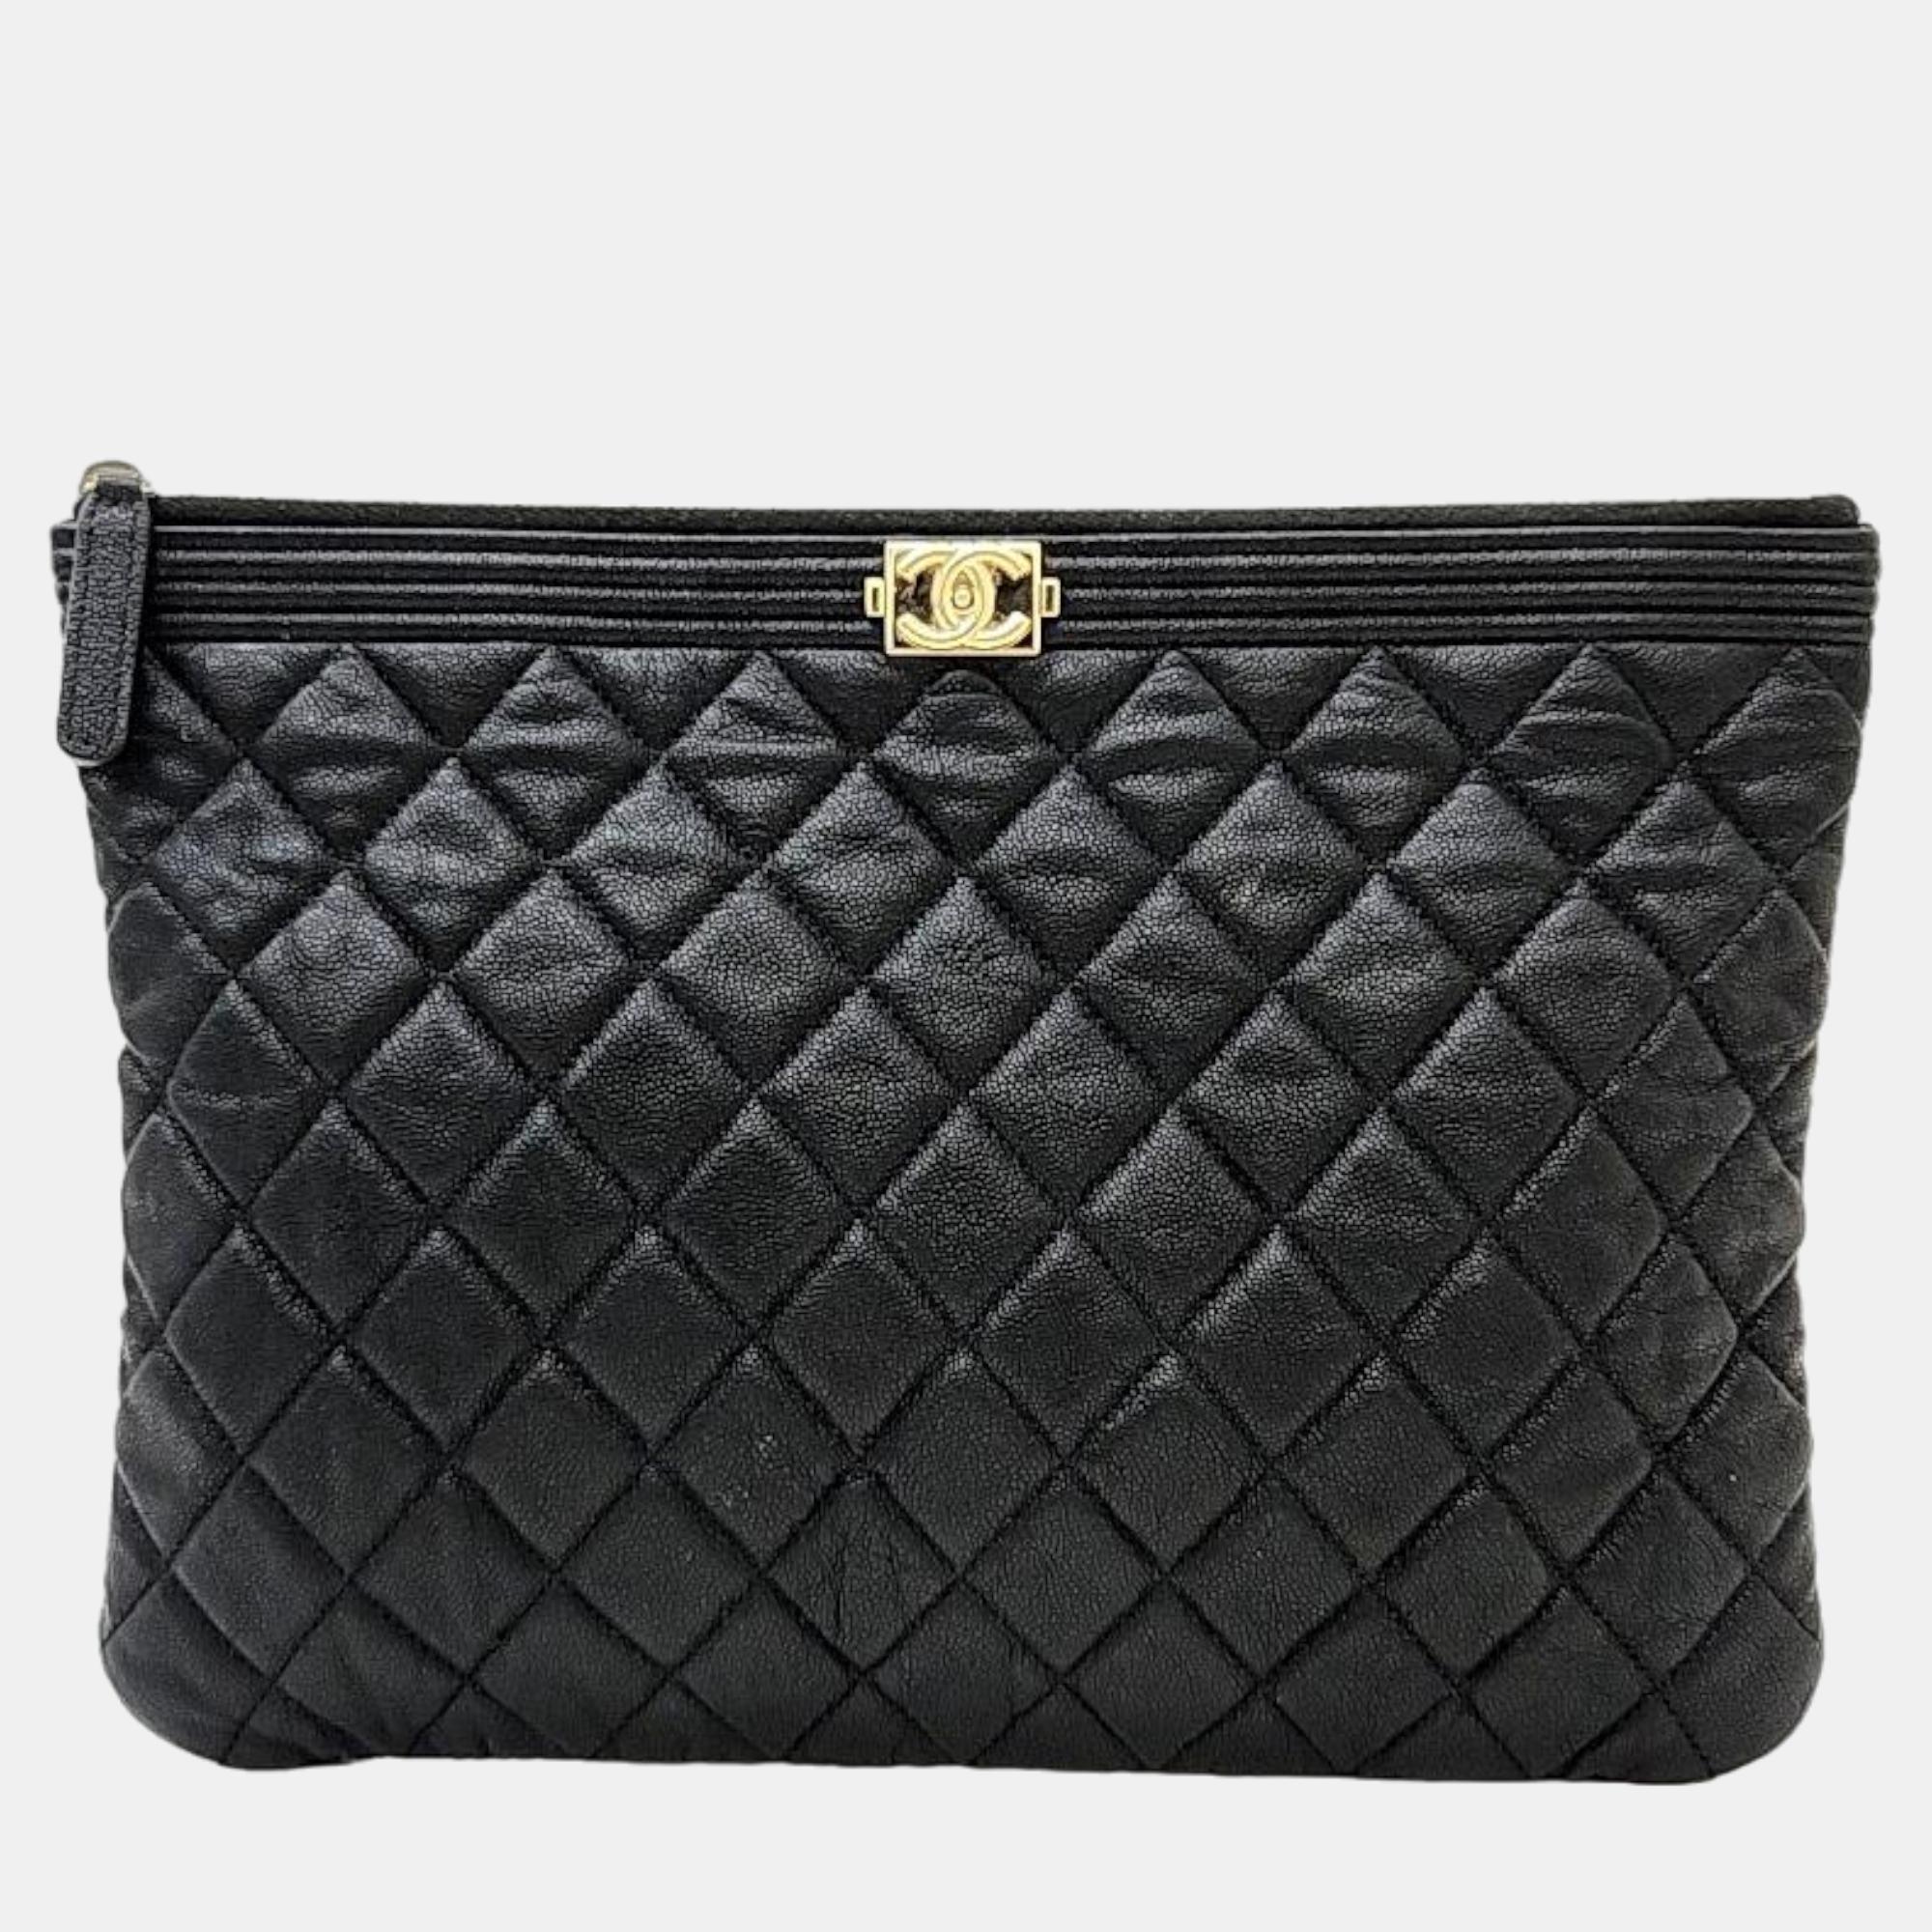 Pre-owned Chanel Black Caviar Leather O Case Medium Quilted Boy Clutch Bag